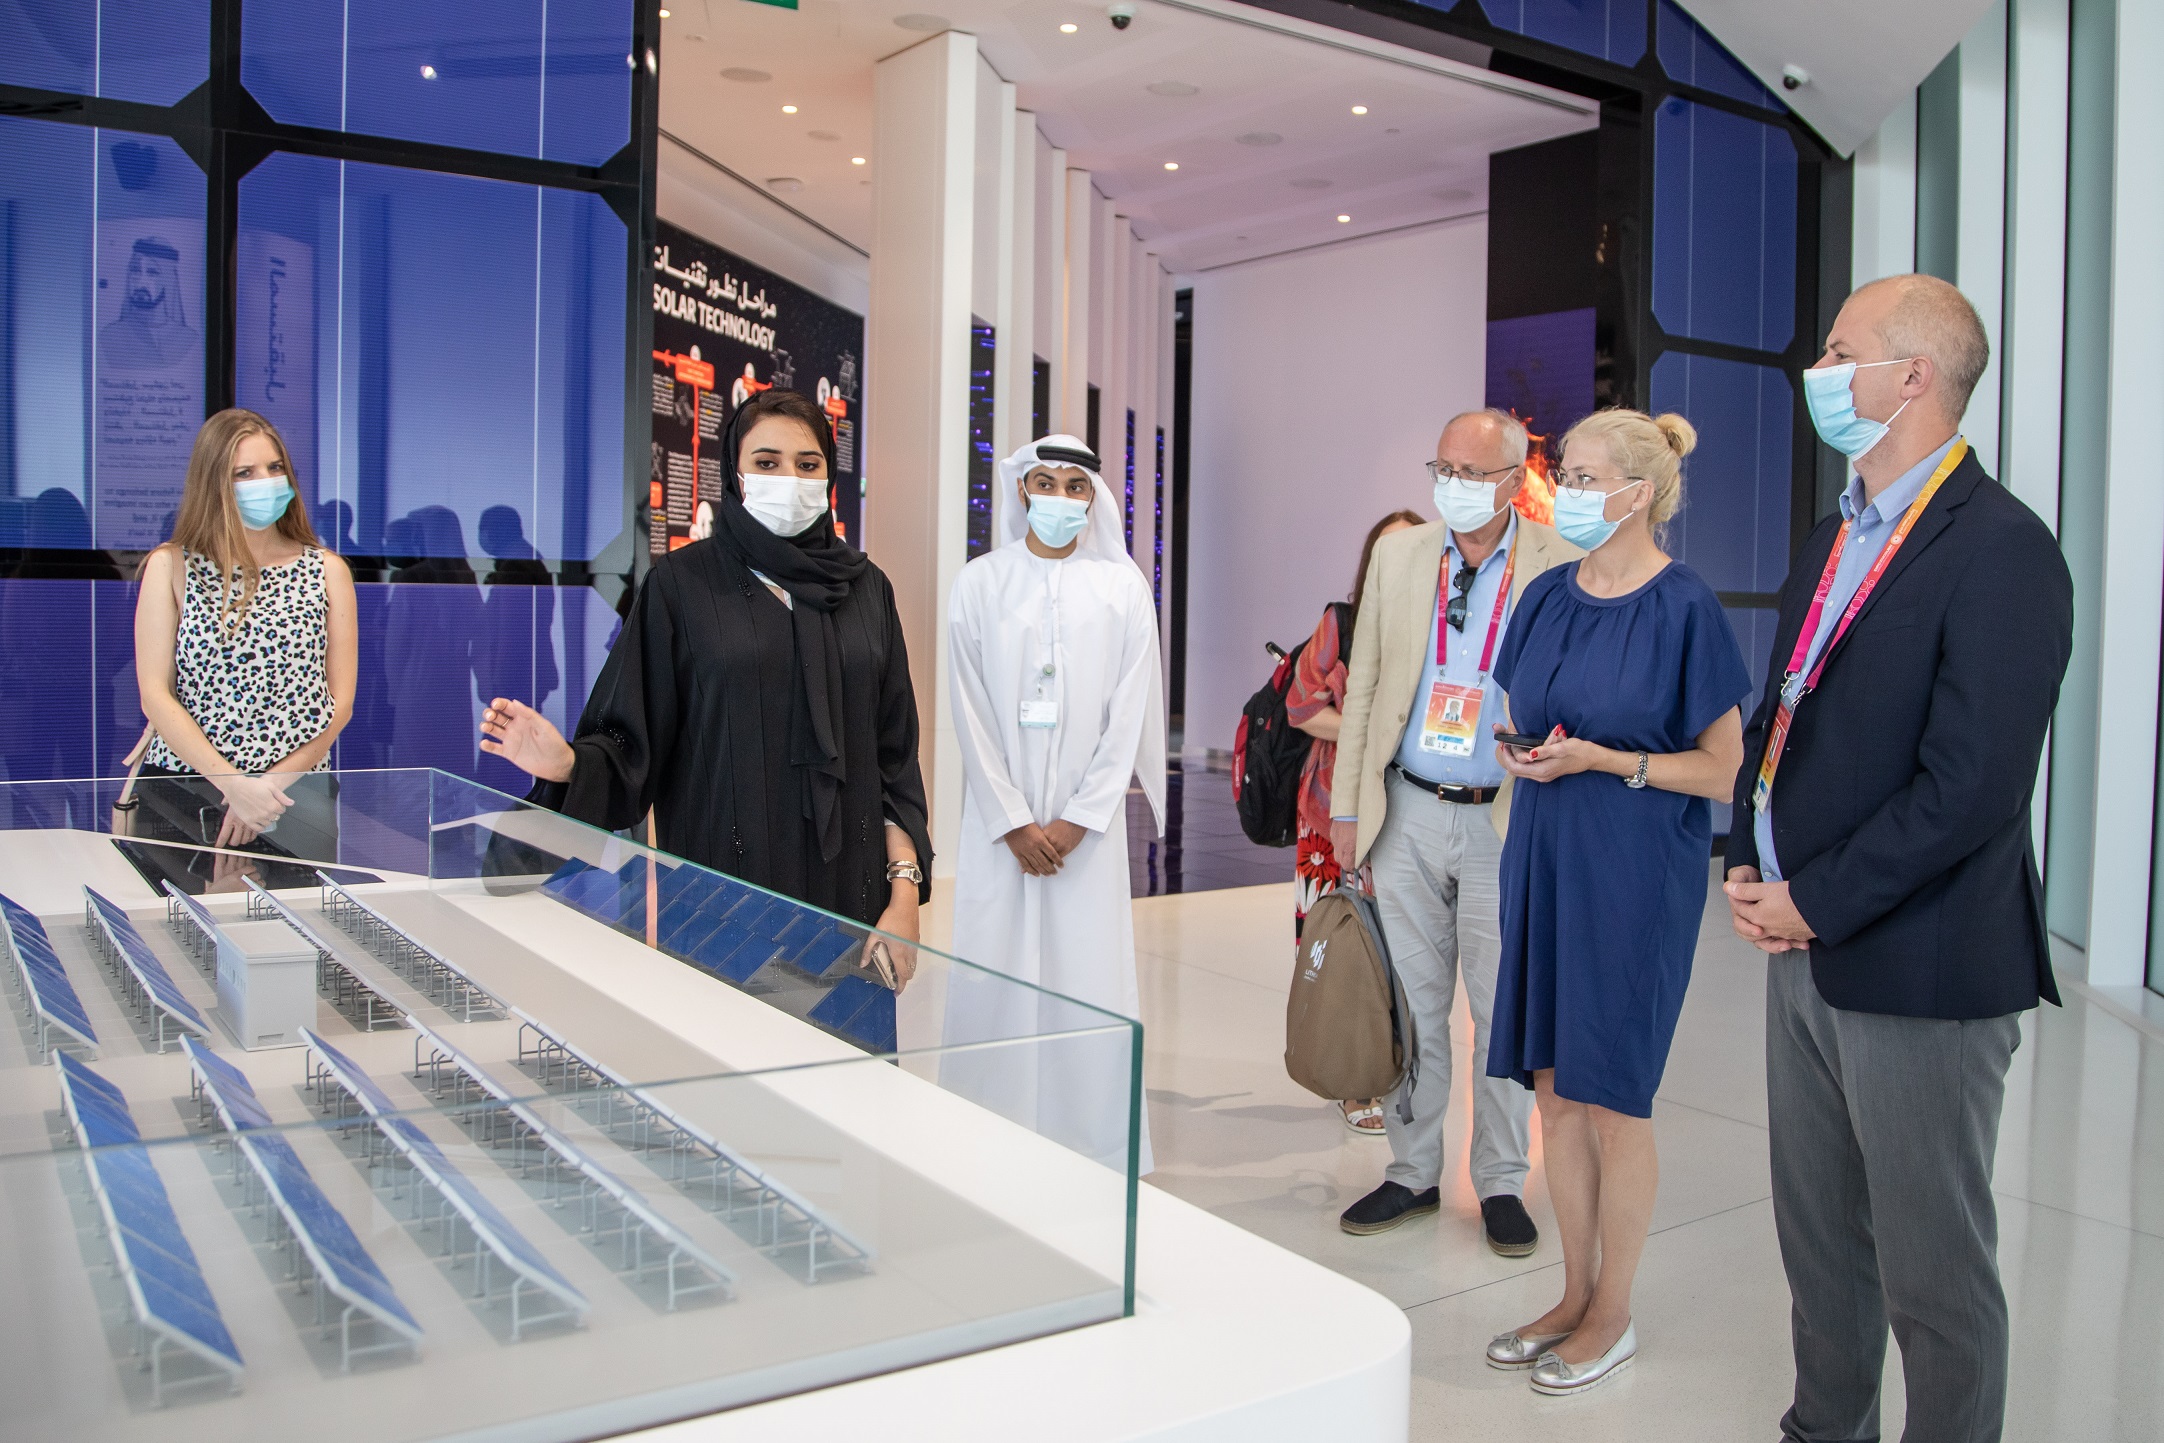 DEWA’s Innovation Centre welcomes several high-level delegations from around the world to review the latest clean energy technologies